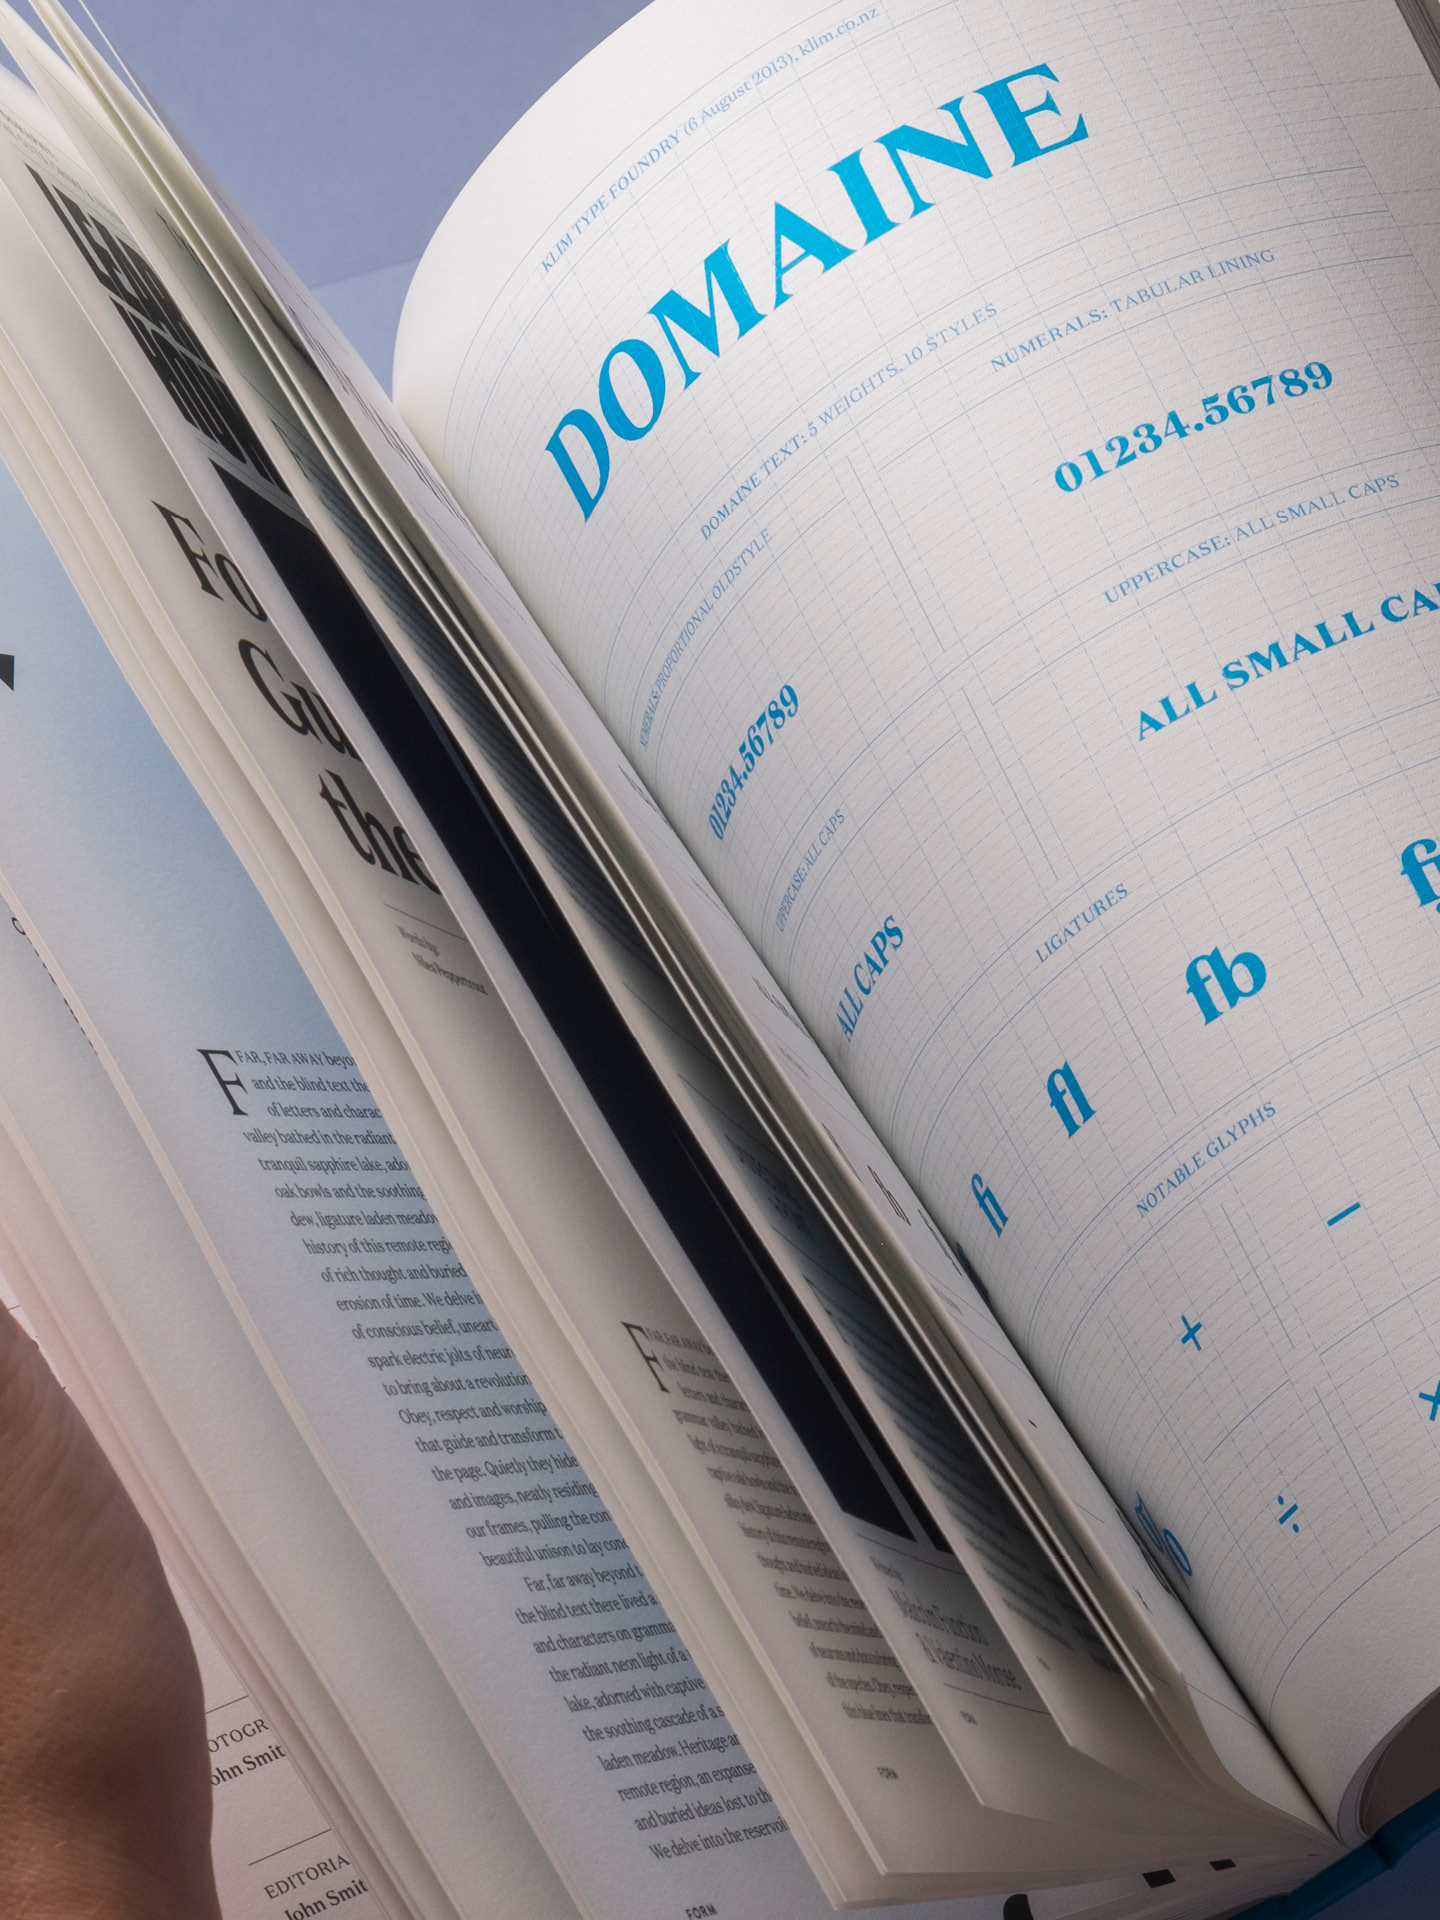 A detailed shot from one of the spreads featuring an overlay of grids demonstrating alignment to the content